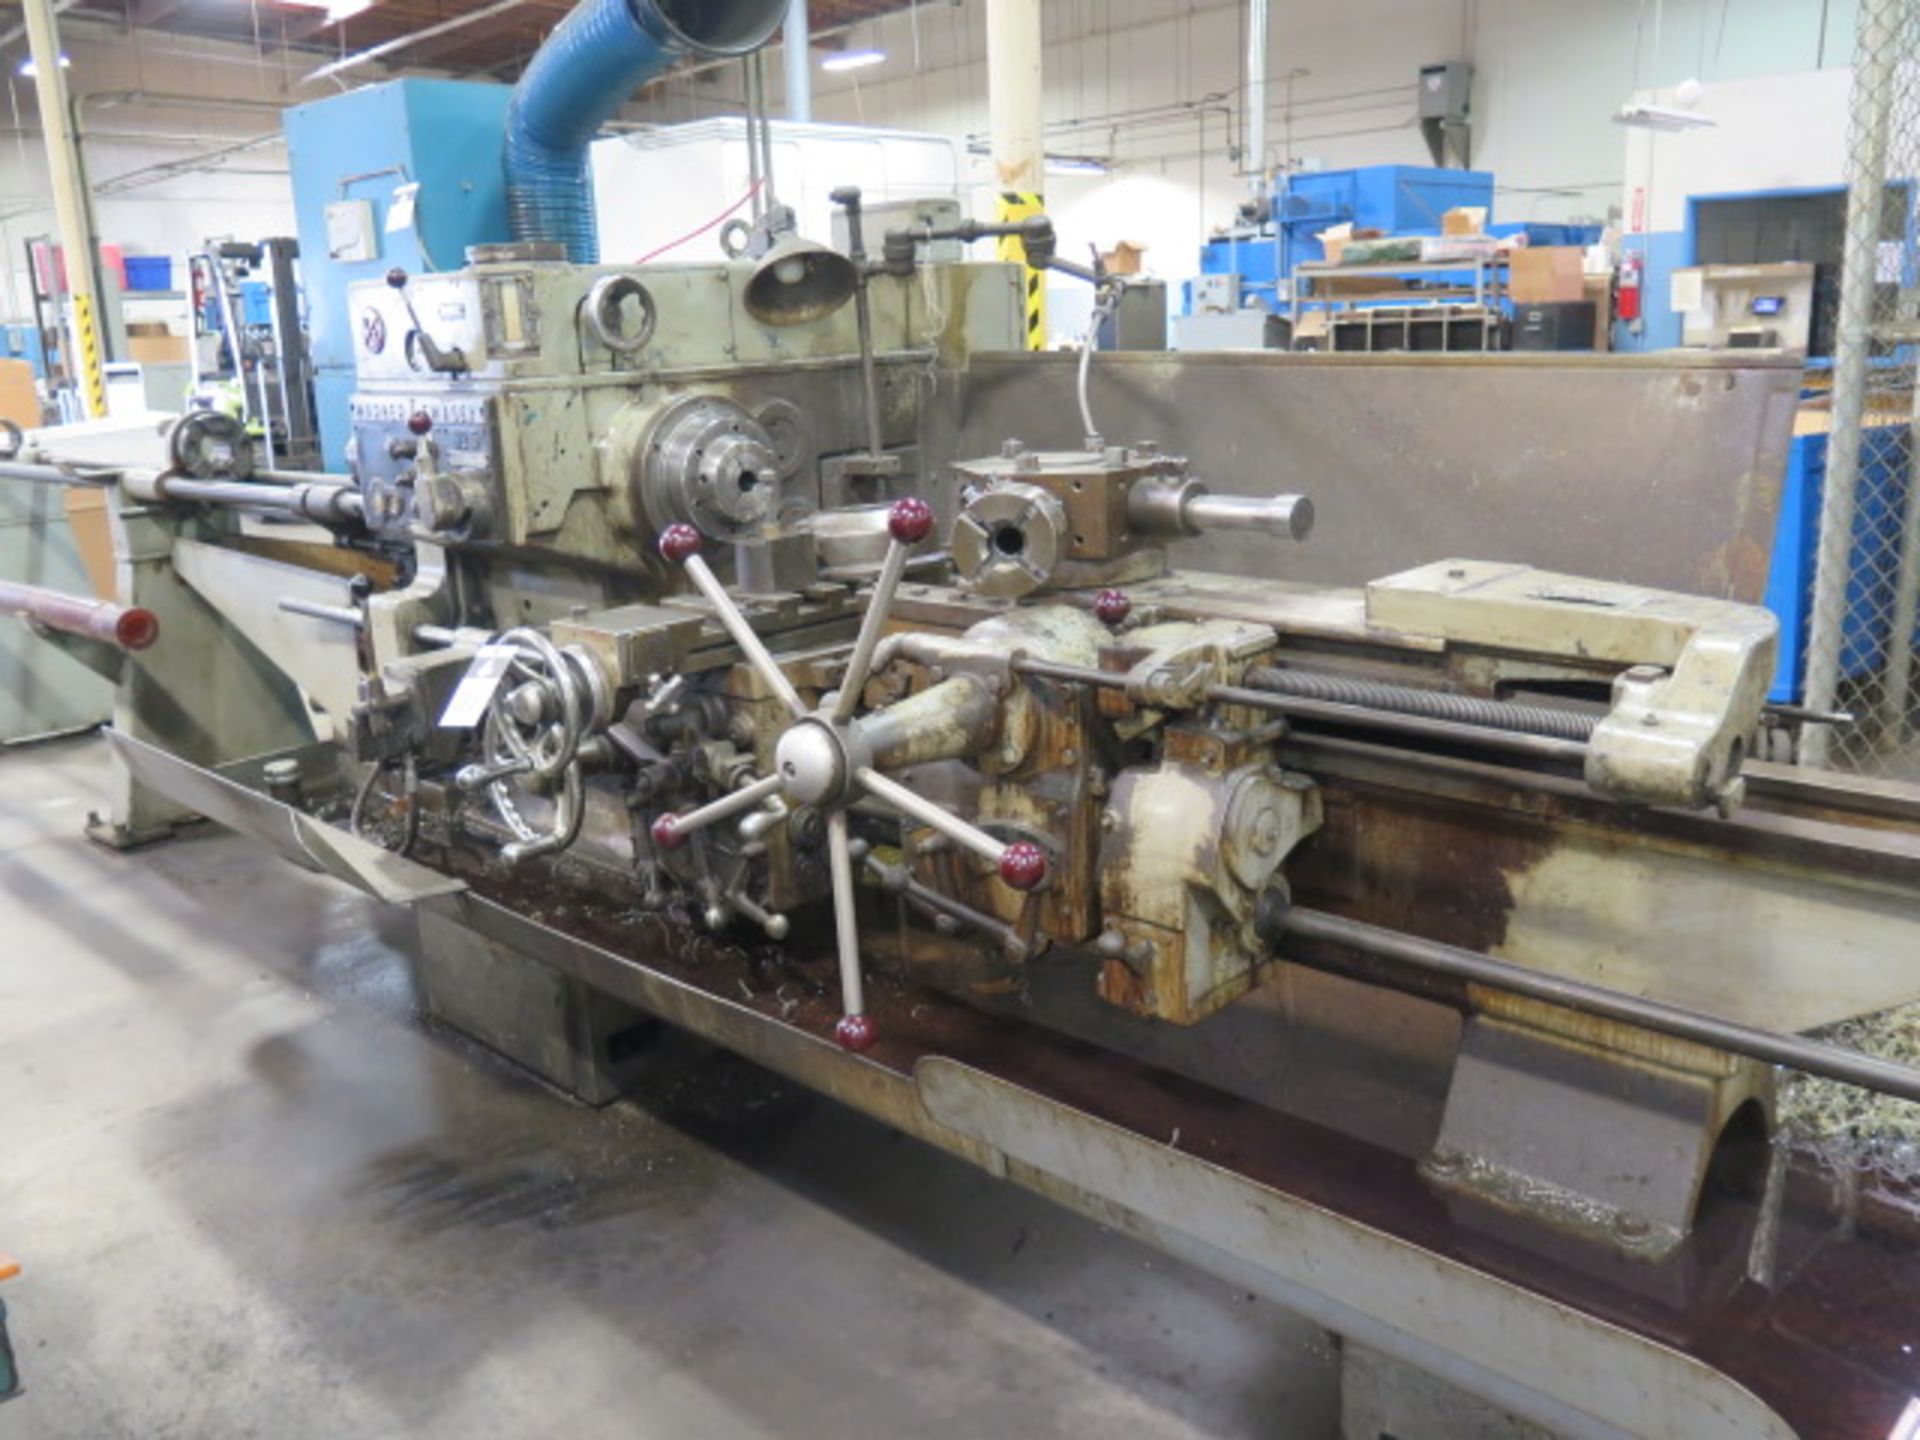 Warner & Swasey No. 5 Turret Lathe s/n 1730290 w/ 25-1553 RPM, 5-Station, Cross Slide, SOLD AS IS - Image 2 of 11